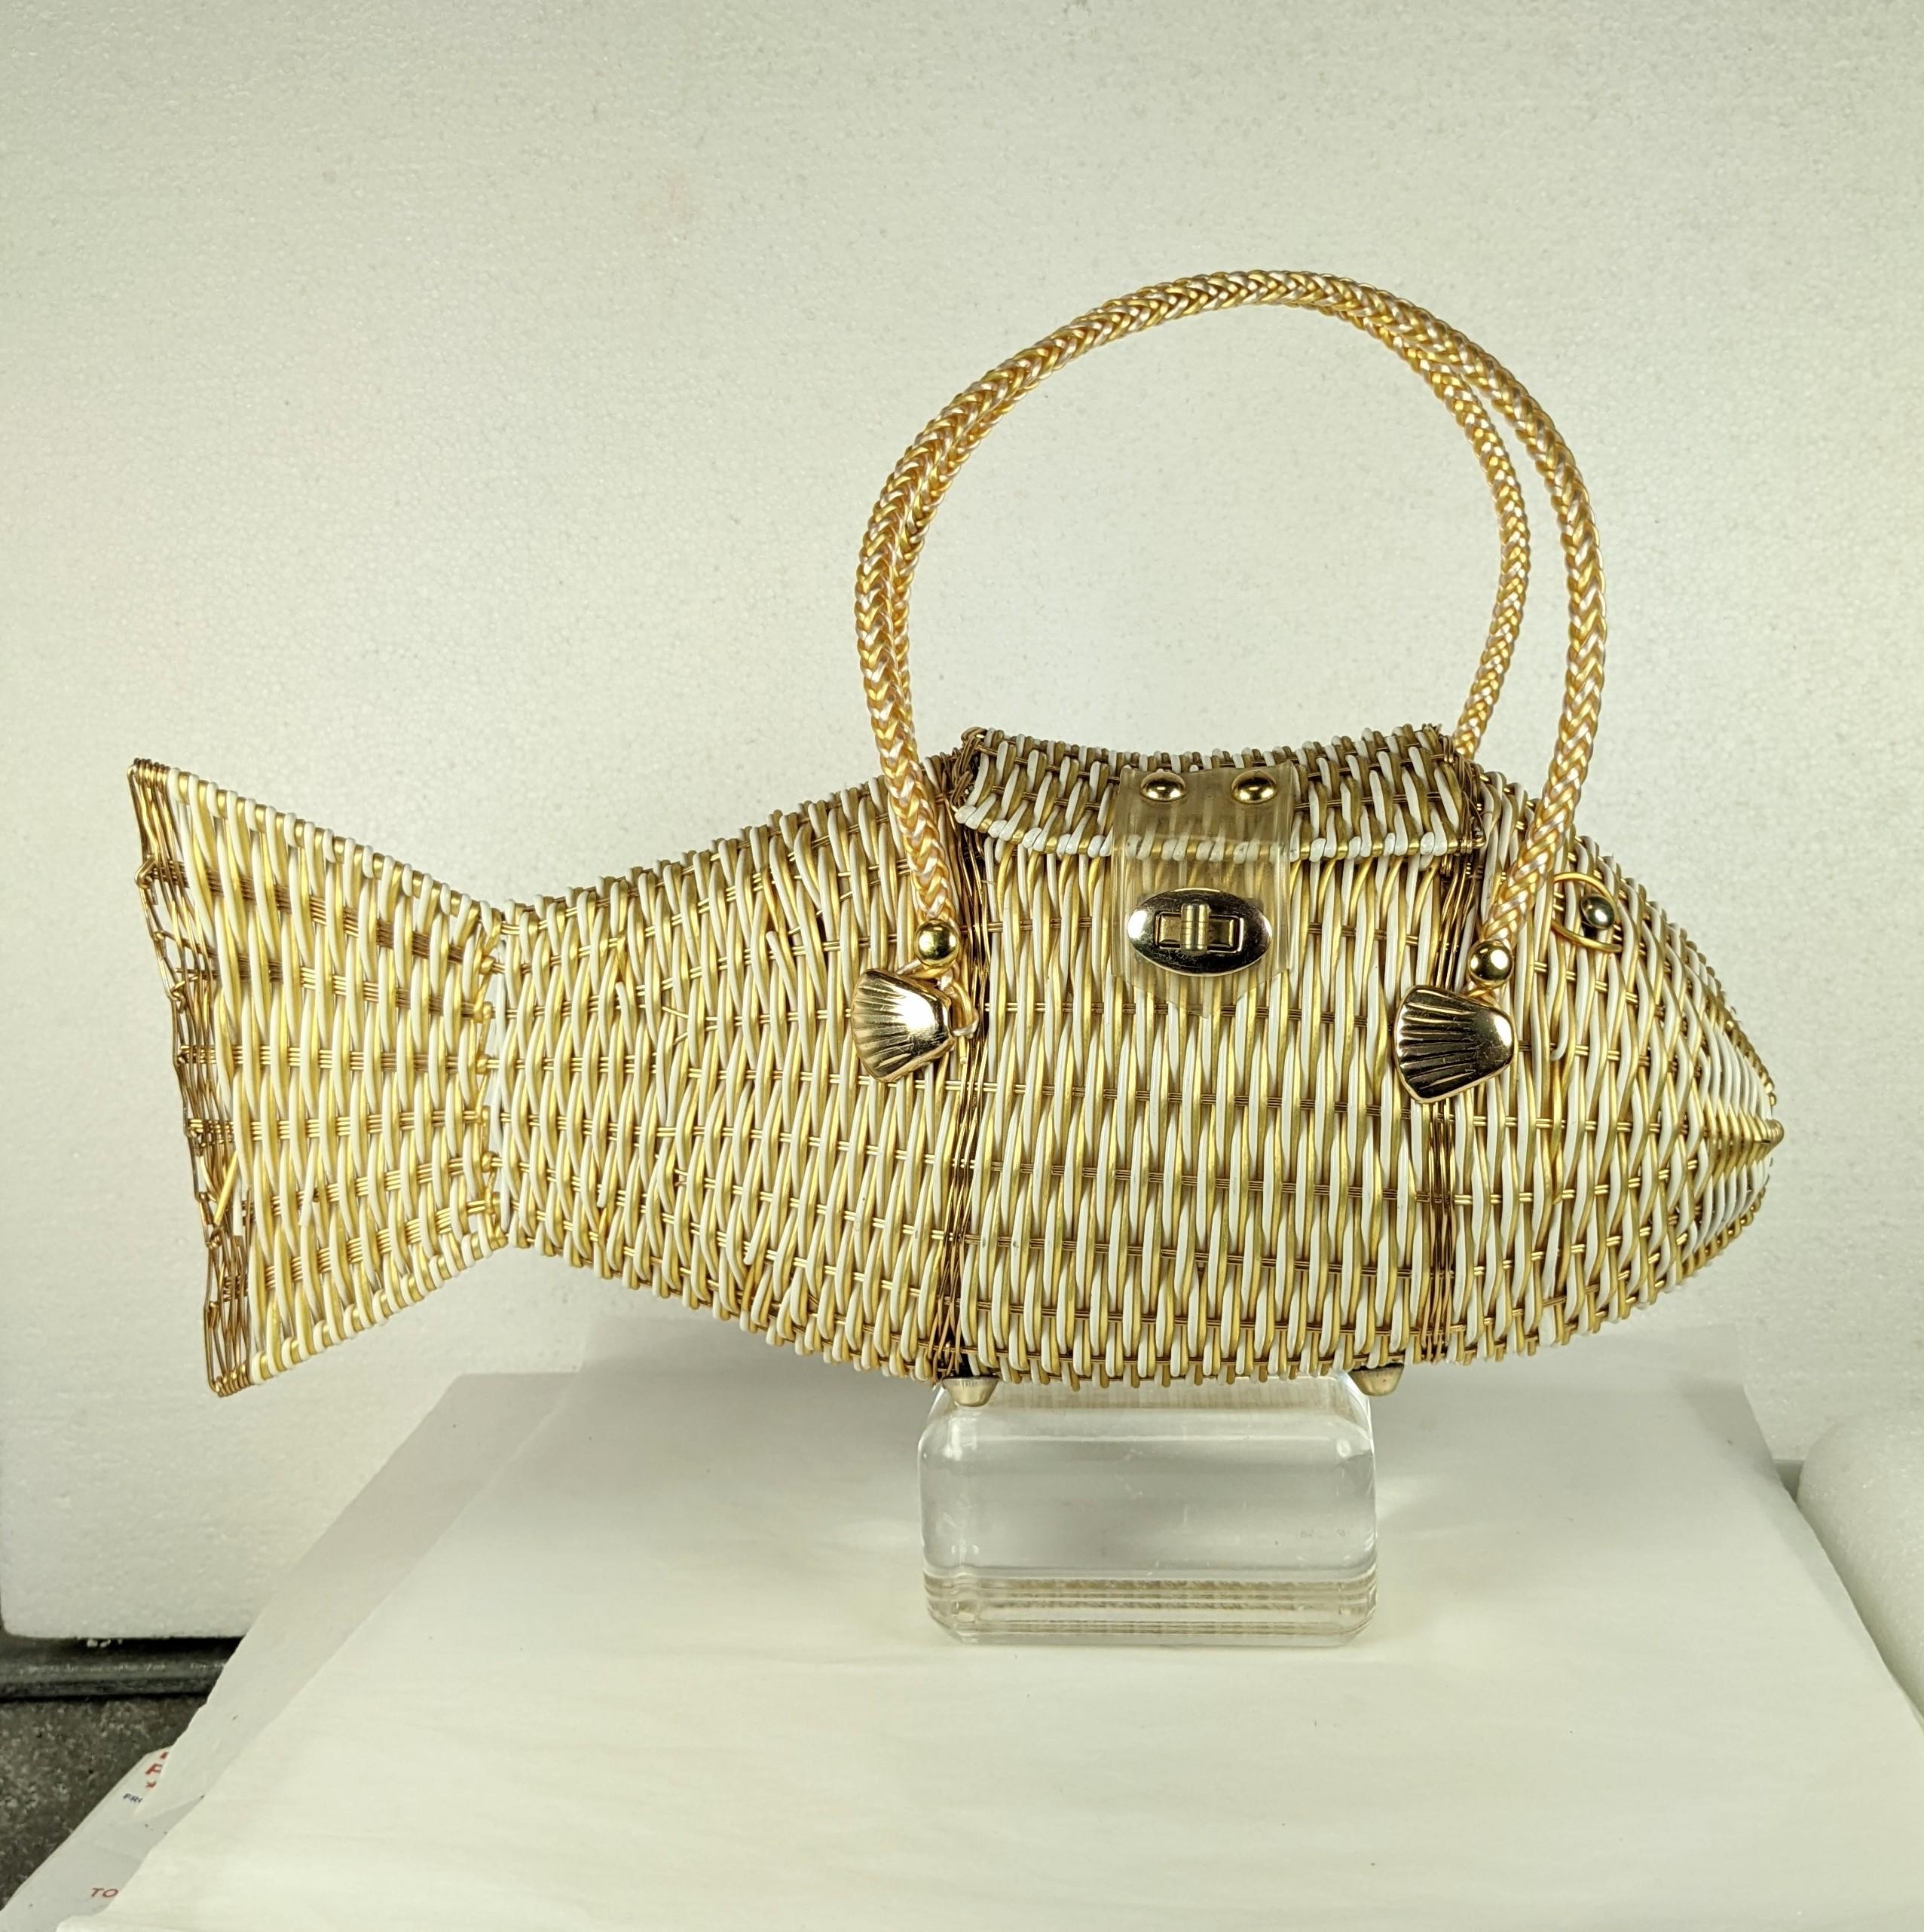 Charming collectible 1960's Woven Figural Fish Bag hand made in Hong Kong of white and gold plasticized nylon filament. Flap closure with turn lock. Really cool with cotton muslin lining and gilt fins added for detail. Perfect summer bag, both